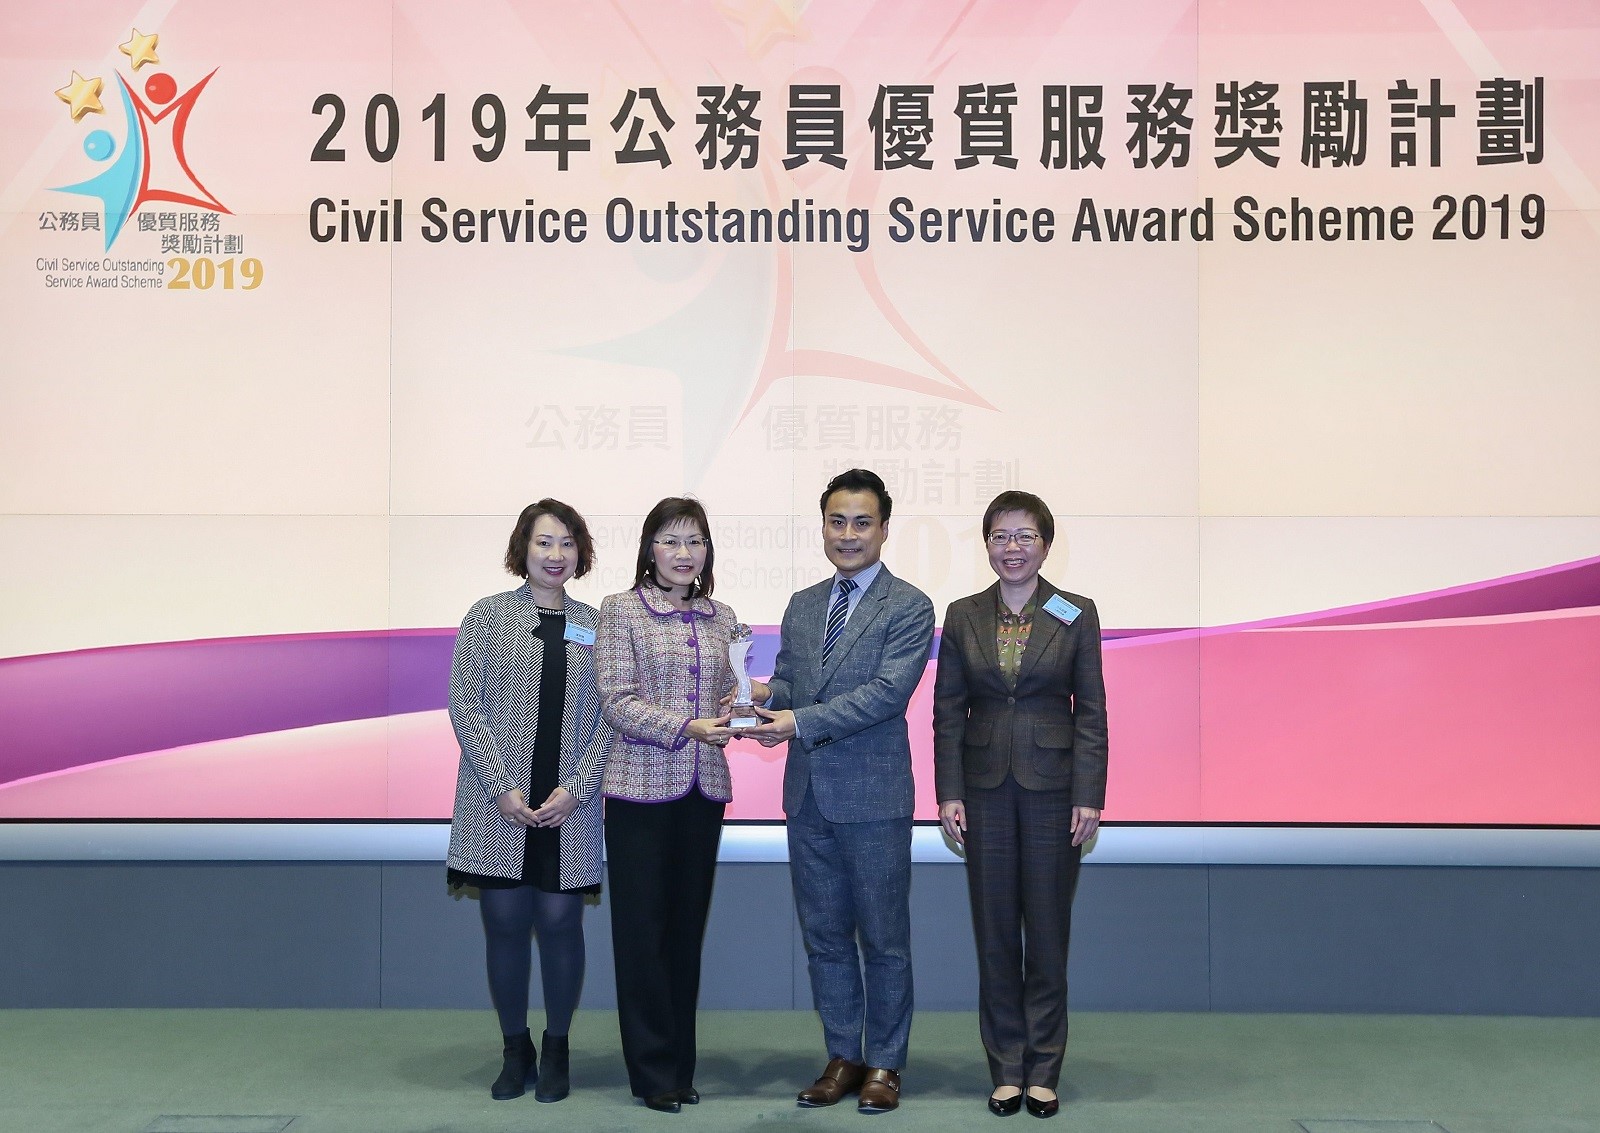 The Land Registry presented the "e-Alert Service for AIs" for participating in the Civil Service Outstanding Service Award Scheme 2019 organised by the Civil Service Bureau and was honoured with the Silver Prize of the Departmental Service Enhancement Award (Small Department Category) of the Scheme.